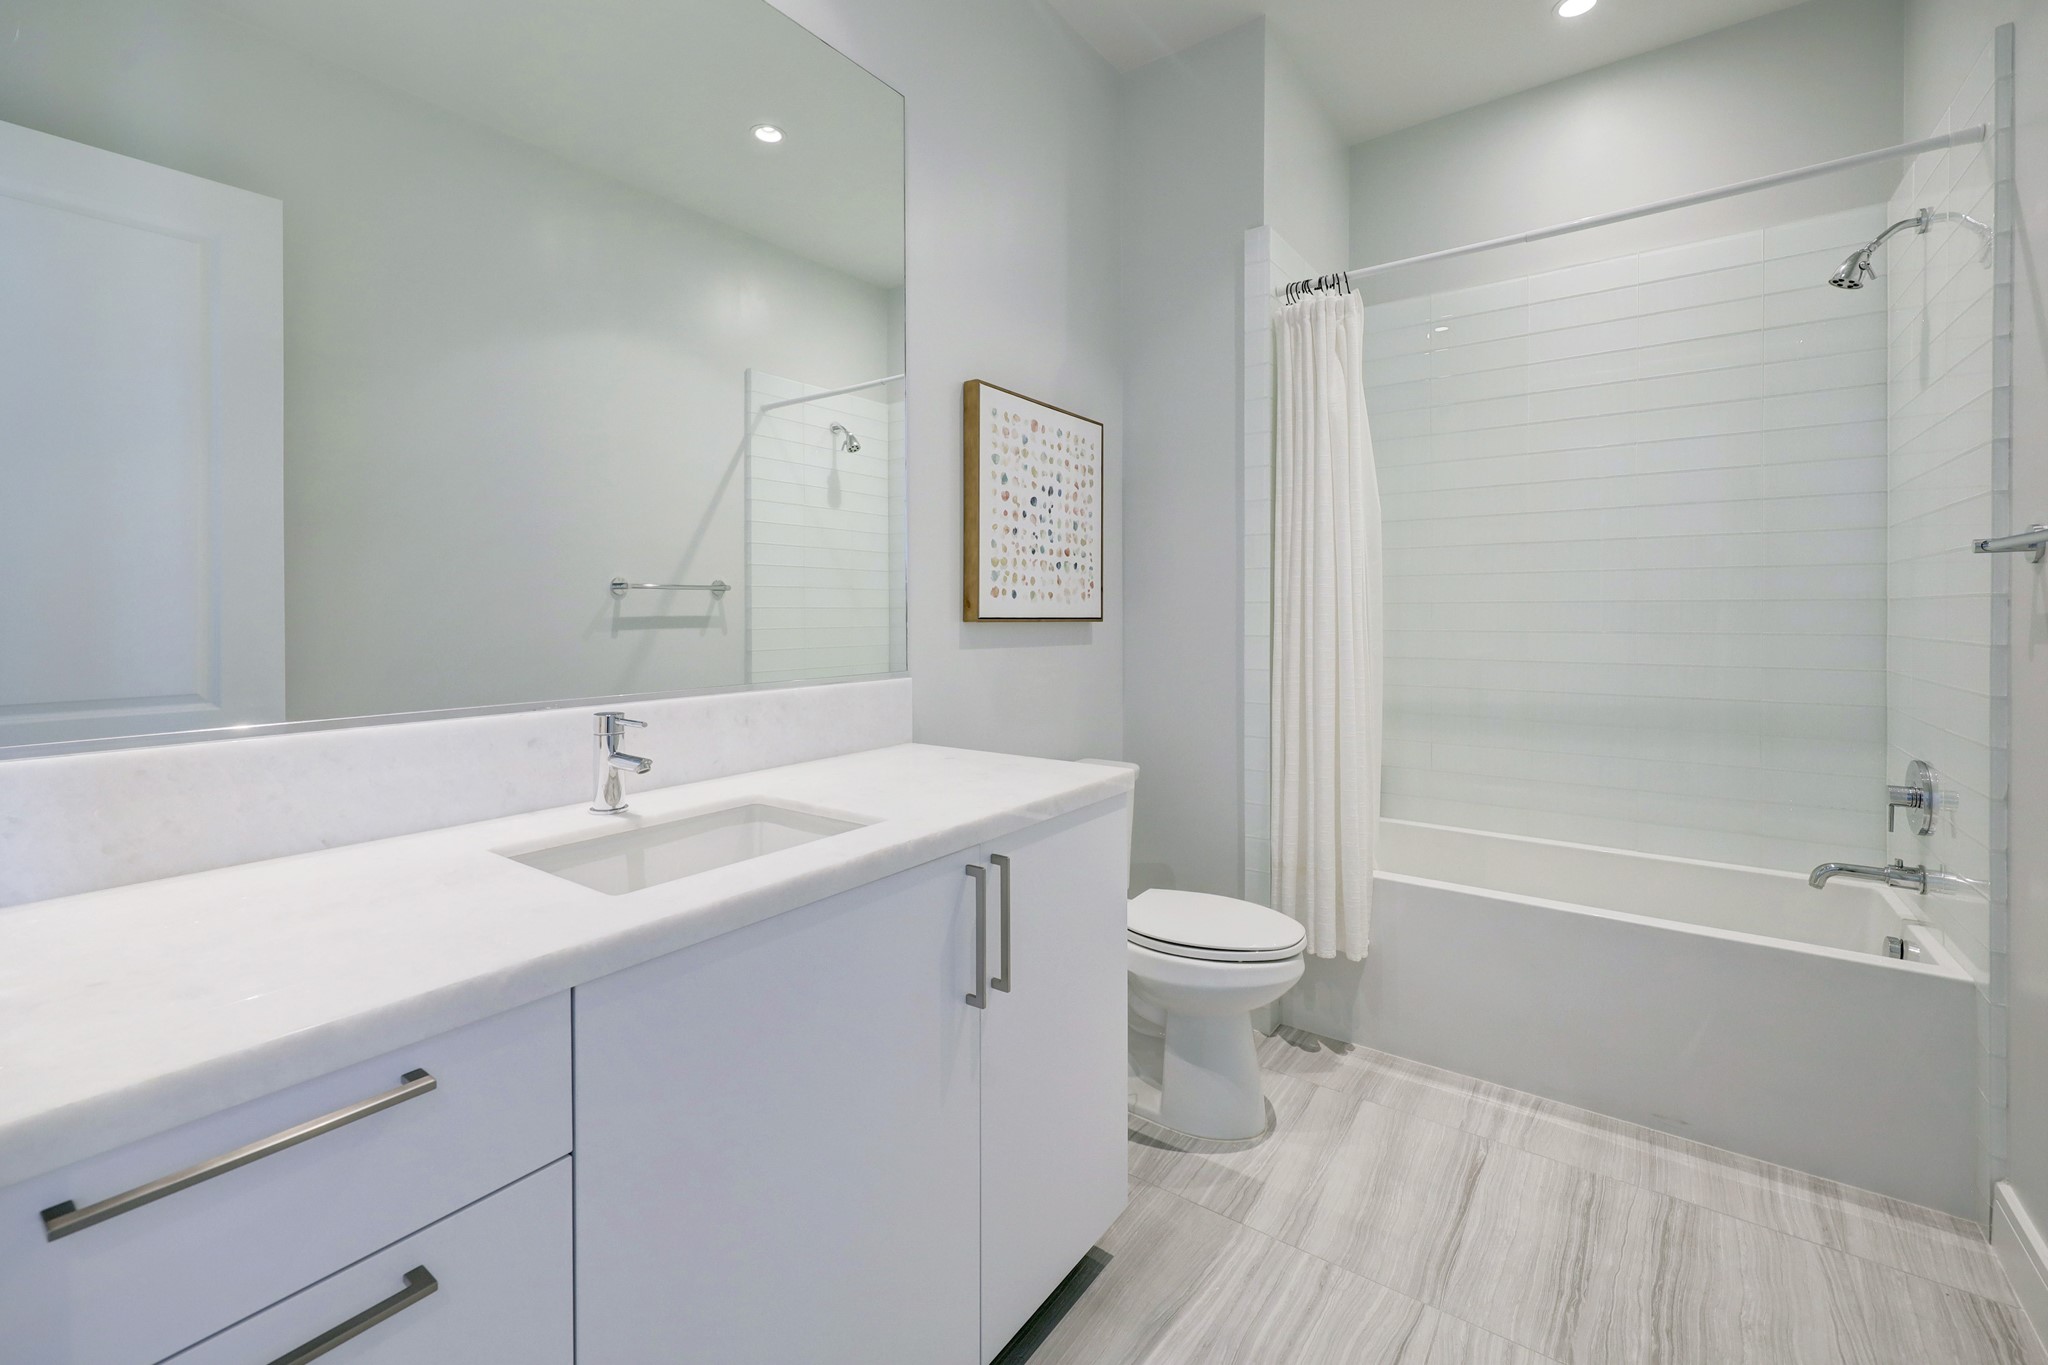 Secondary Bathroom features tile floors and a shower/tub combo